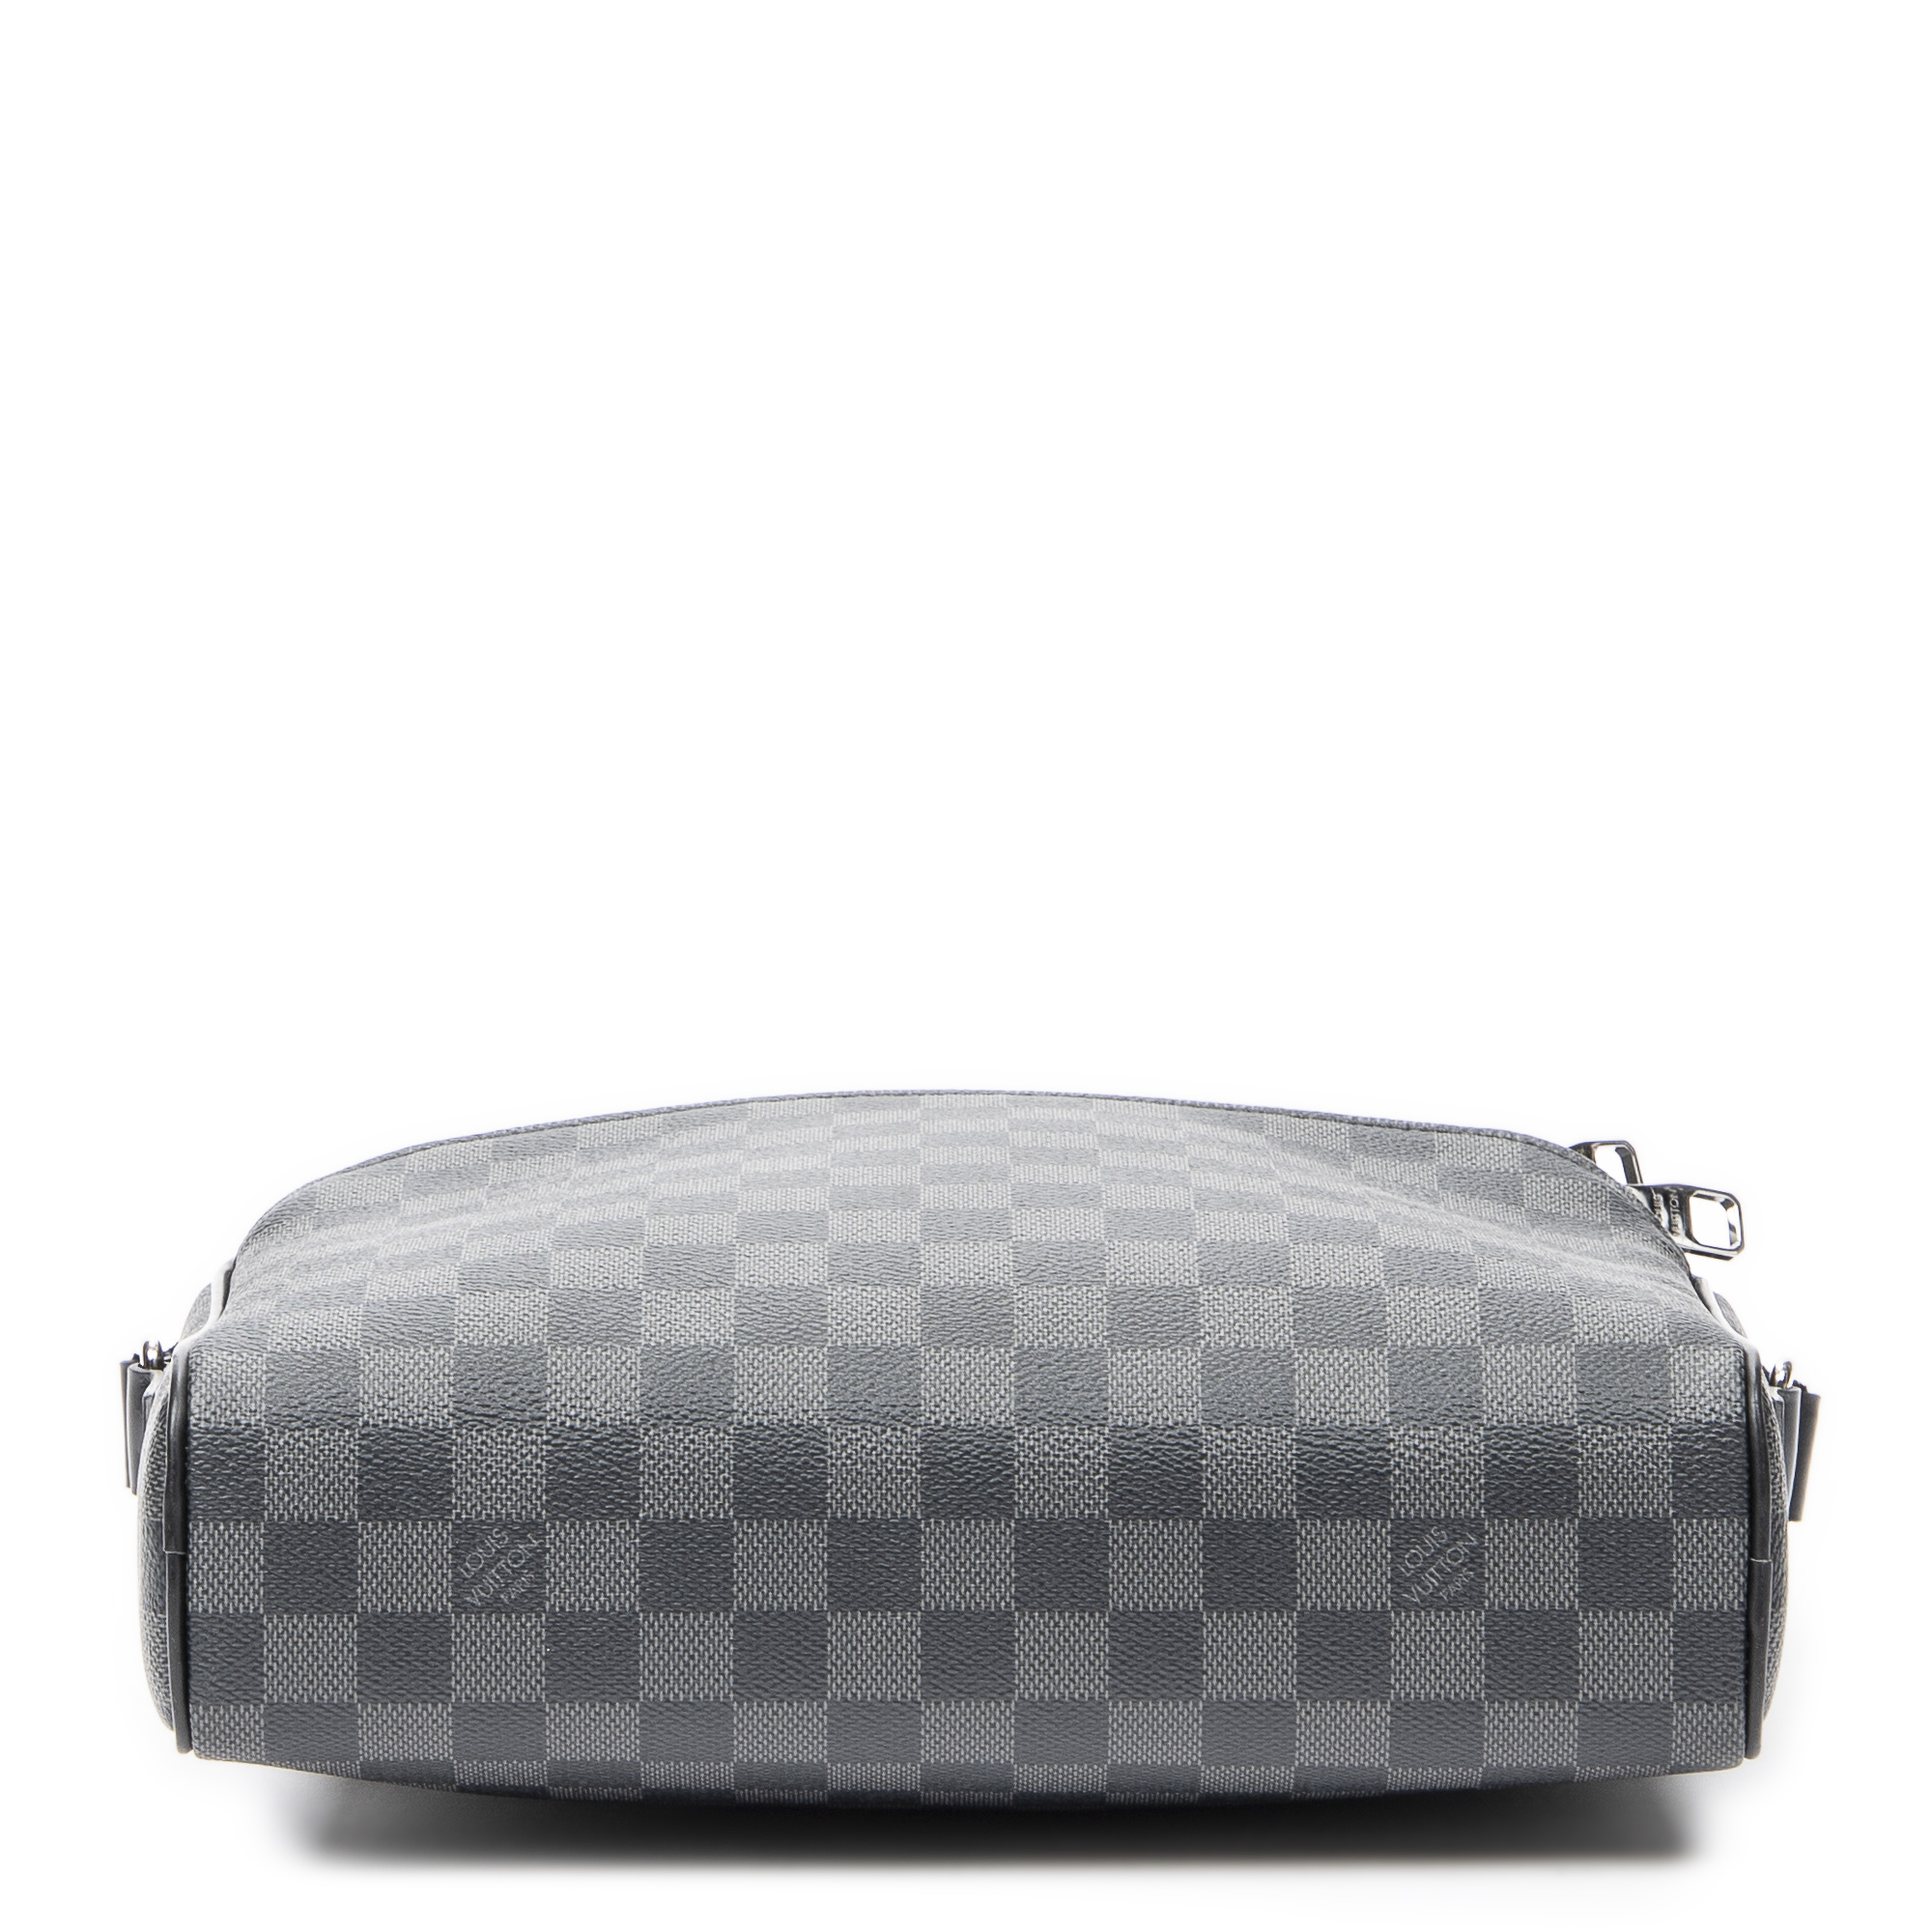 Louis Vuitton Damier Graphite Cosmetic Pouch - Black Cosmetic Bags